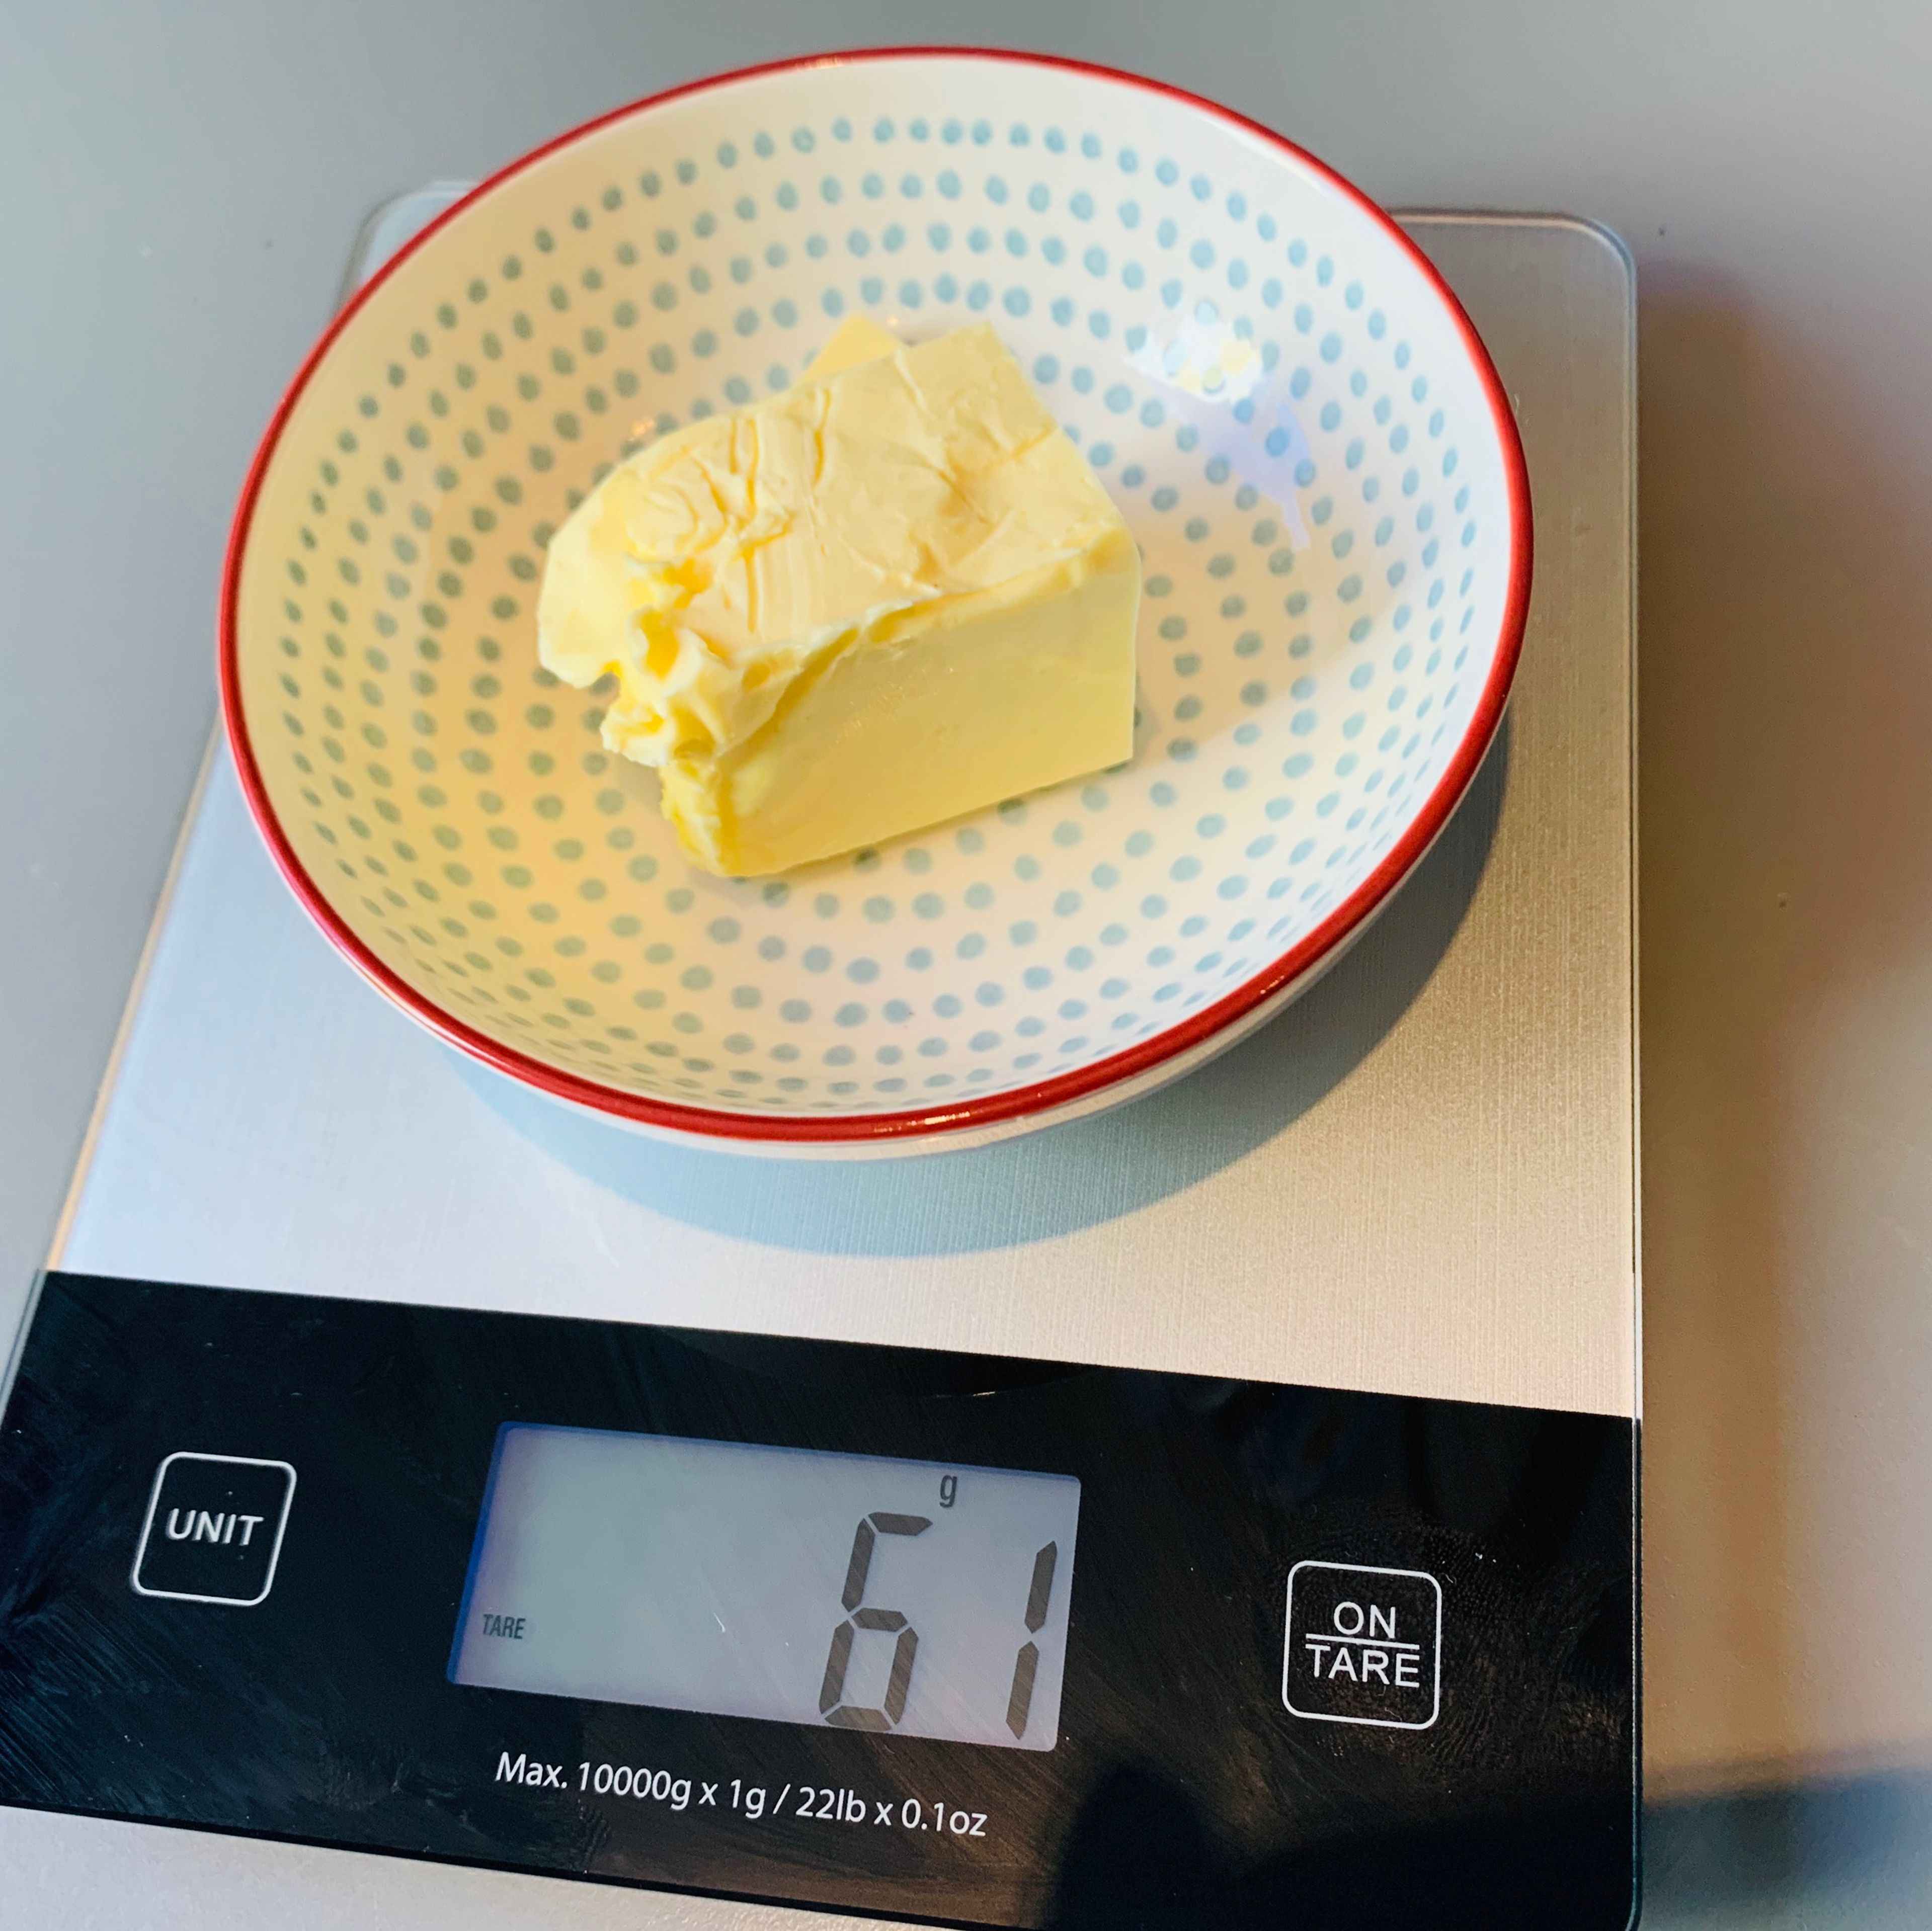 Prepare 60 gram of butter, put them in the oven on very low heat ~50 to melt down. Let it rest for around 10 minutes.